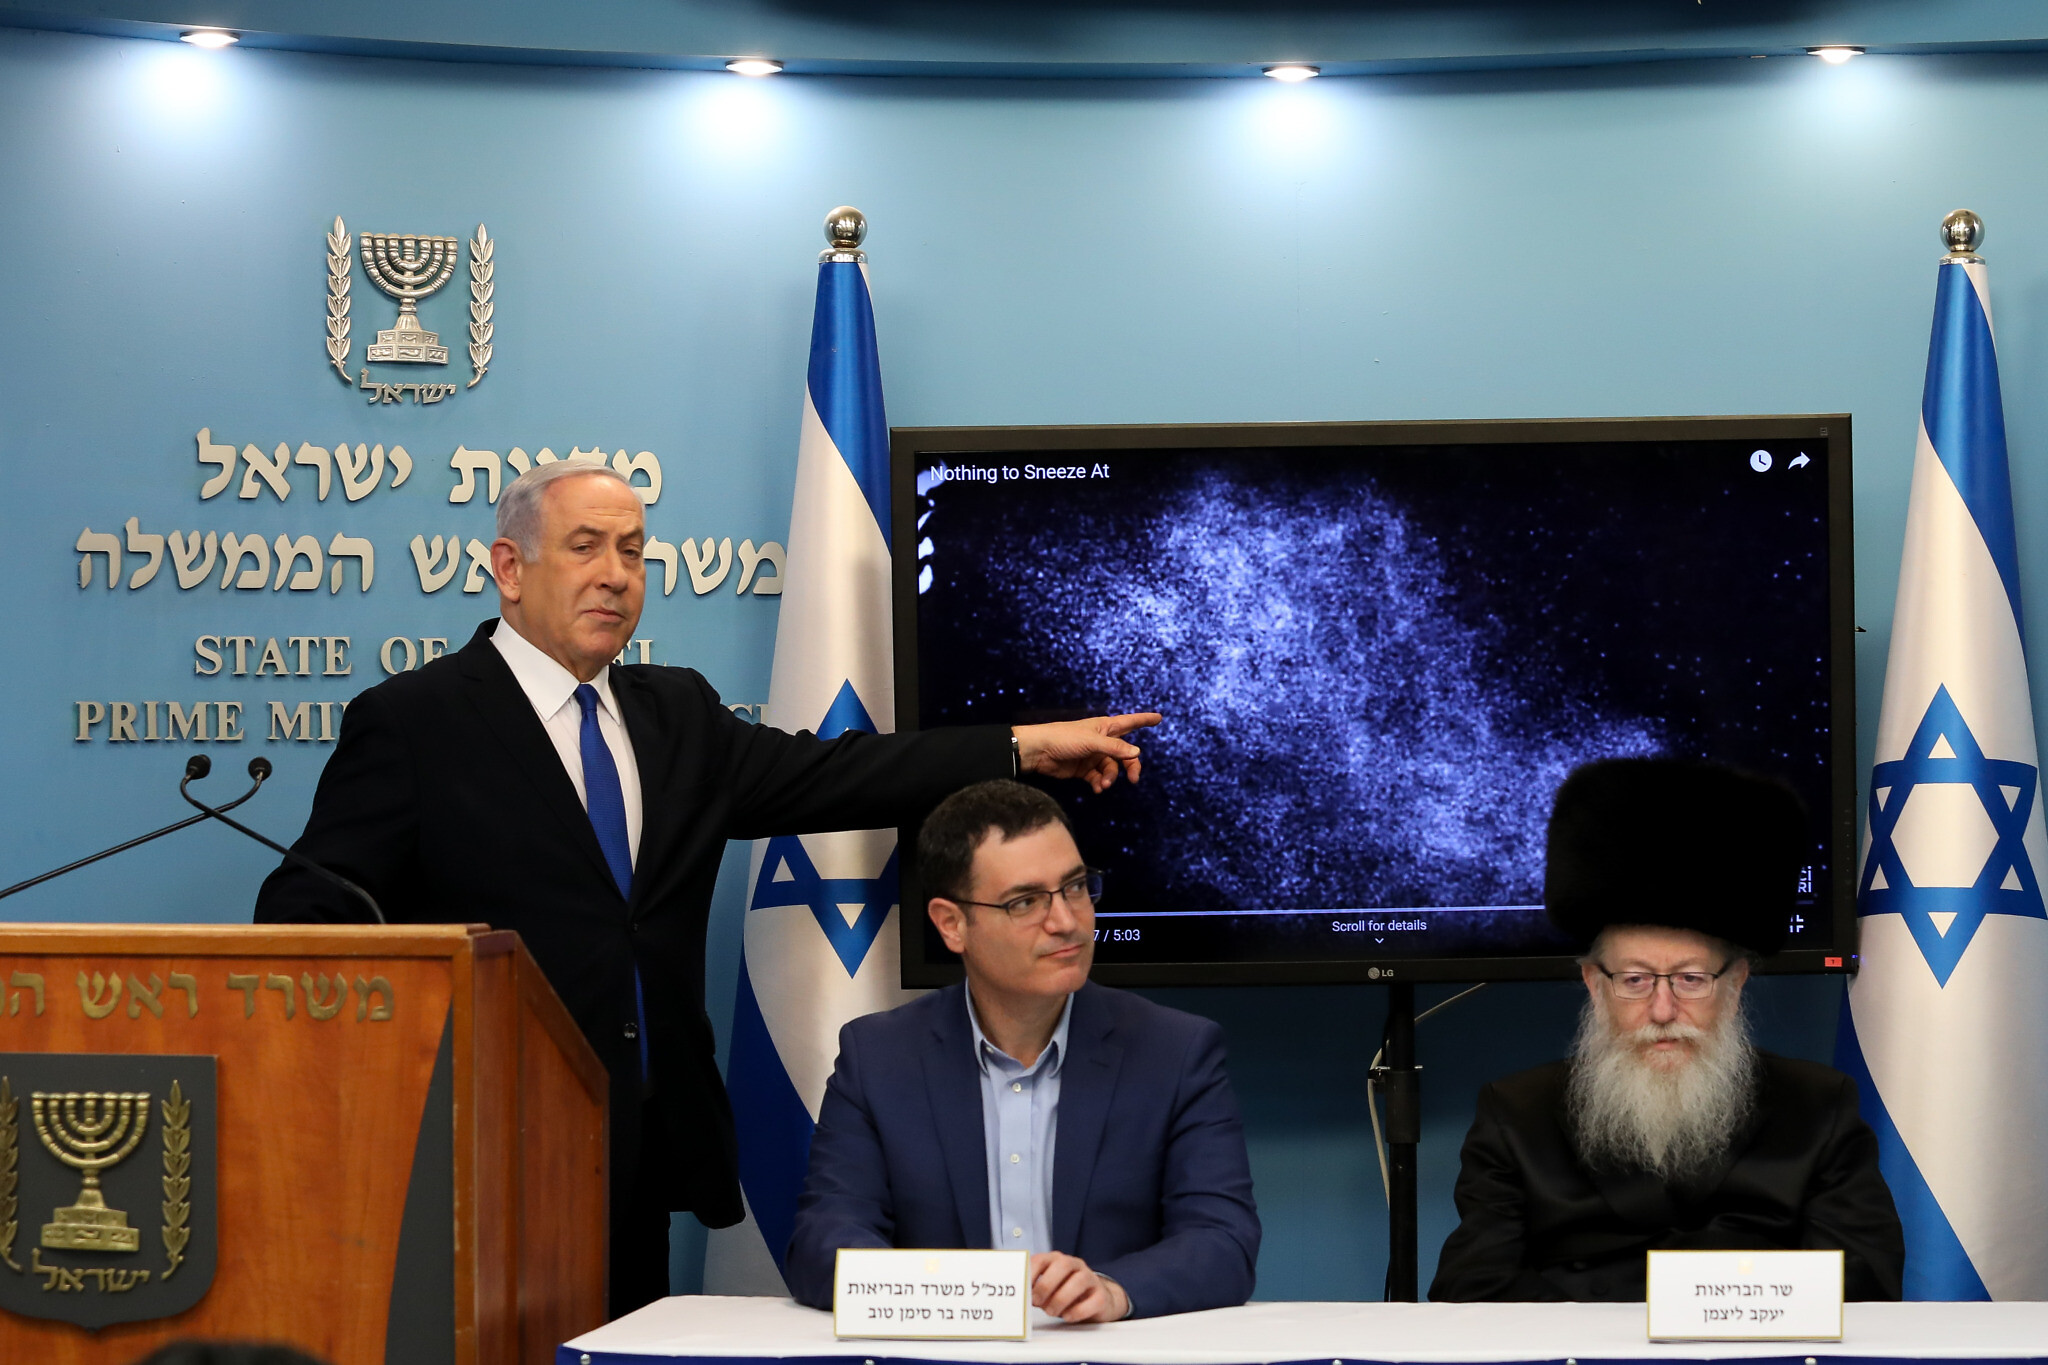 Prime Minister Benjamin Netanyahu (L), Health minister Yaakov Litzman (L) and Health Ministry Director General Moshe Bar Siman-Tov at a press conference about the coronavirus at the Prime Minister’s Office in Jerusalem on March 11, 2020. (Flash90)